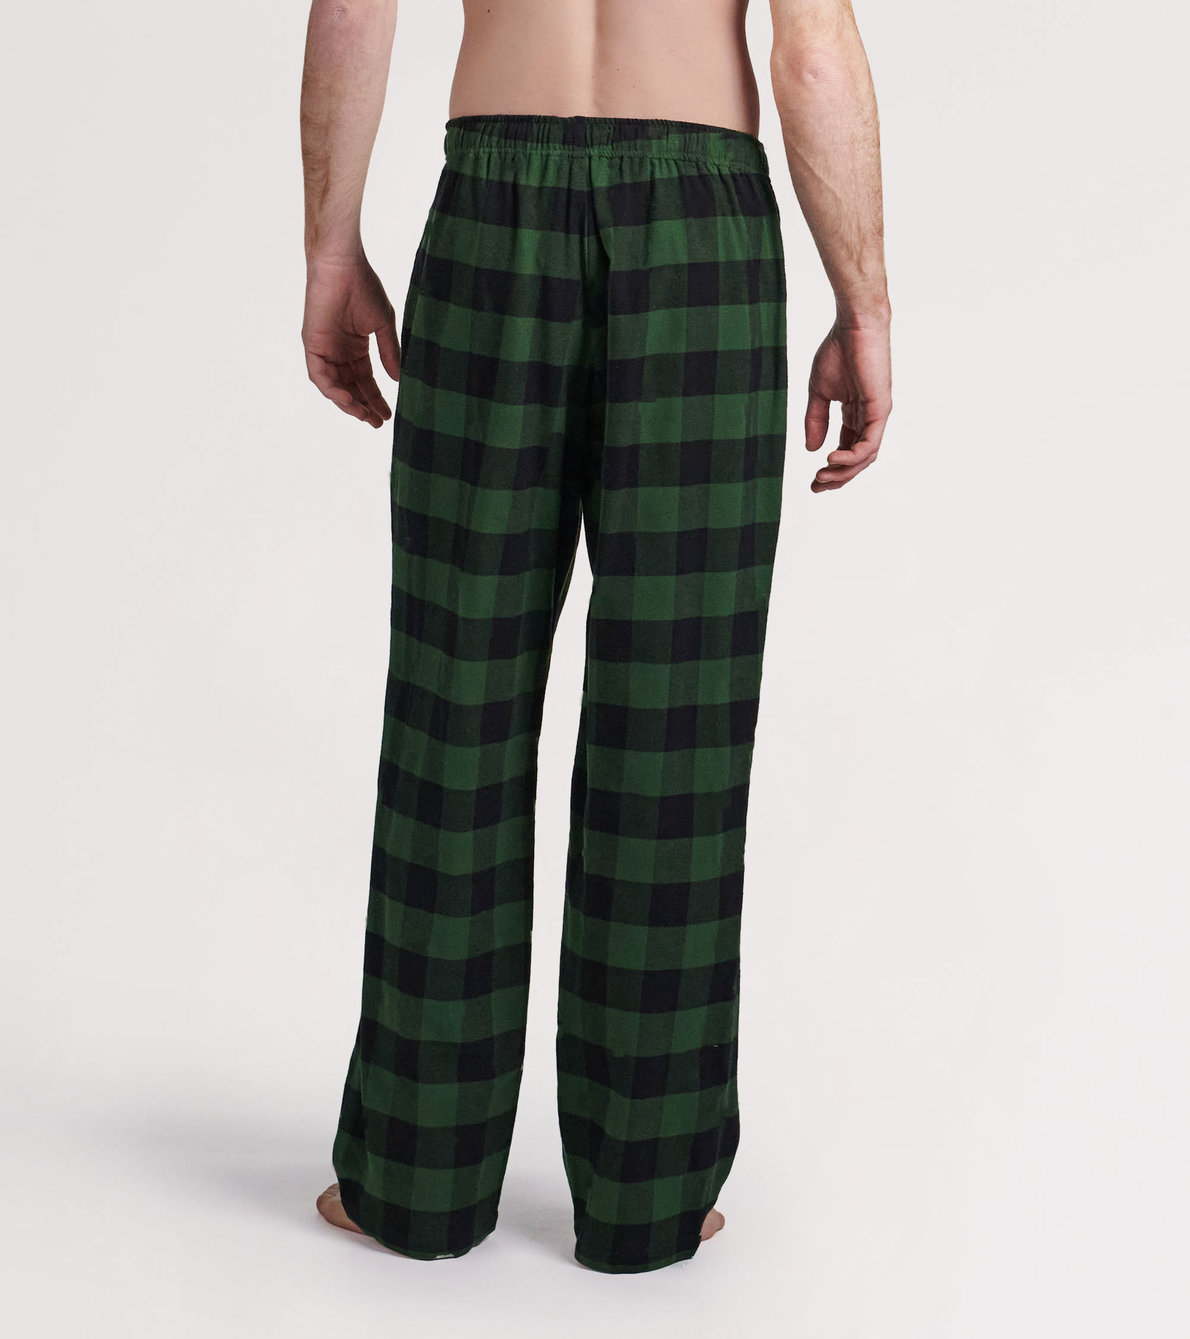 View larger image of Forest Green Plaid Men's Flannel Pajama Pants